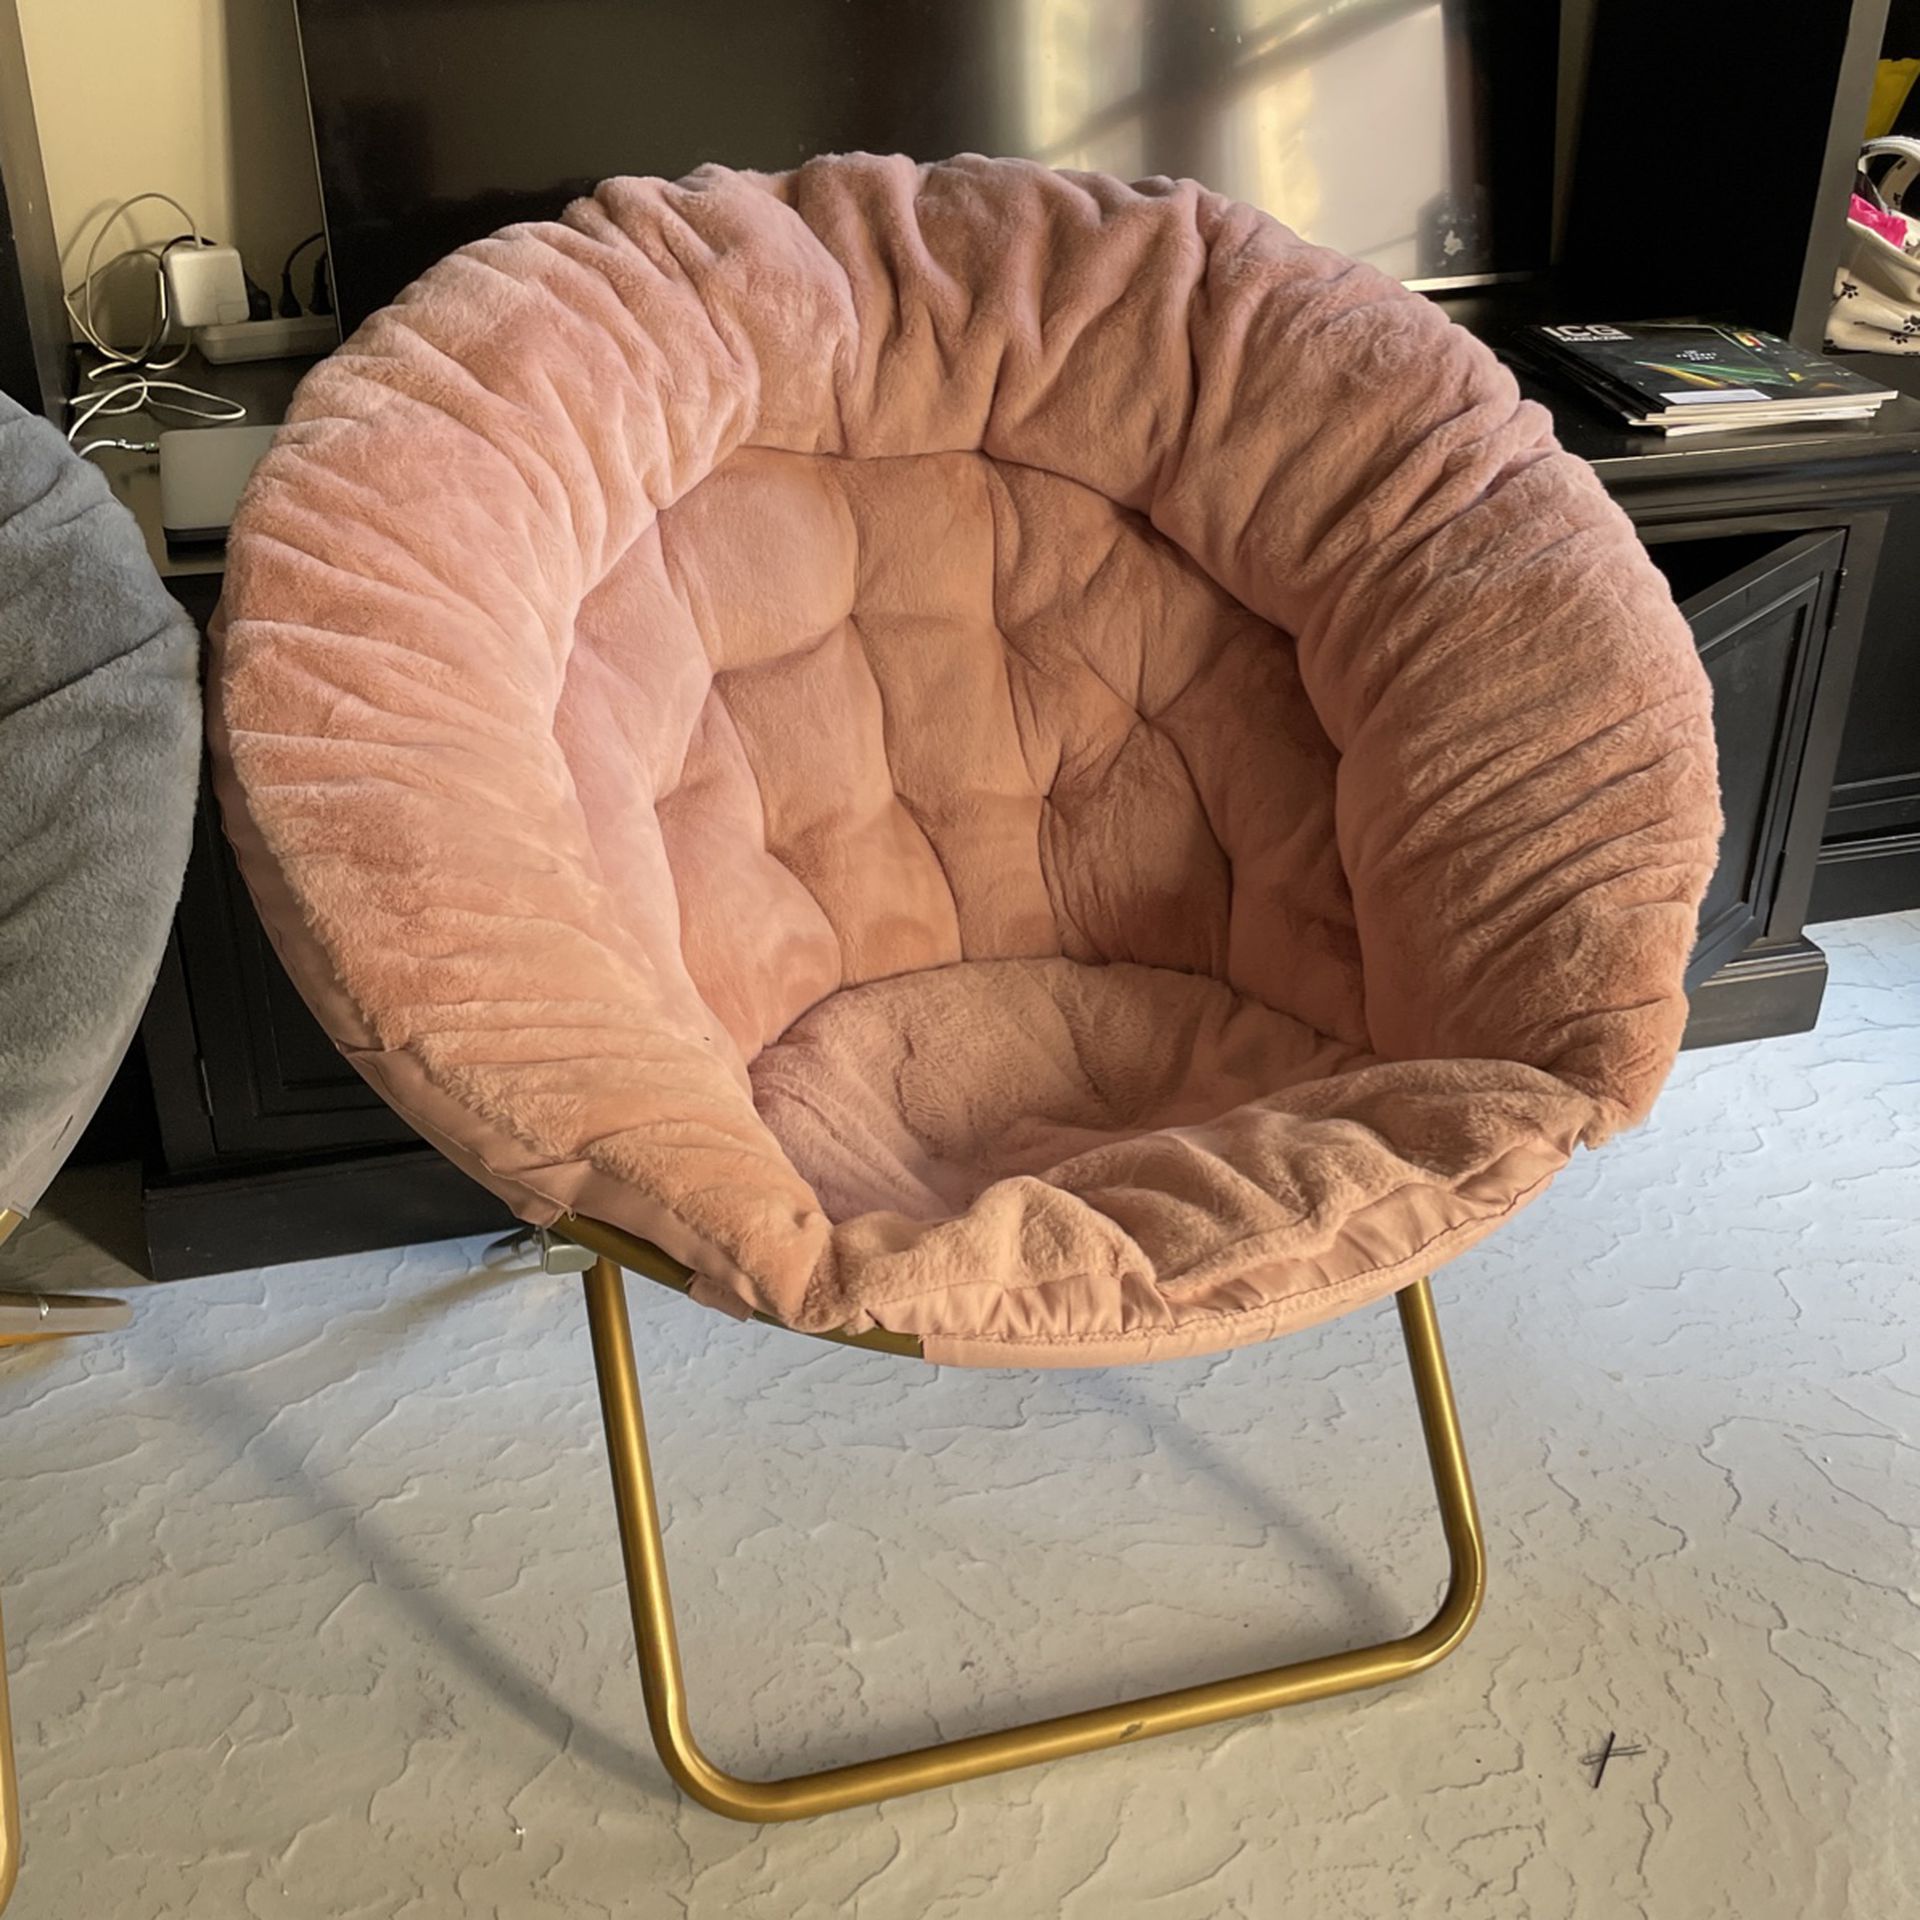 Milliard Cozy Chair/Faux Fur Saucer Chair for Bedroom